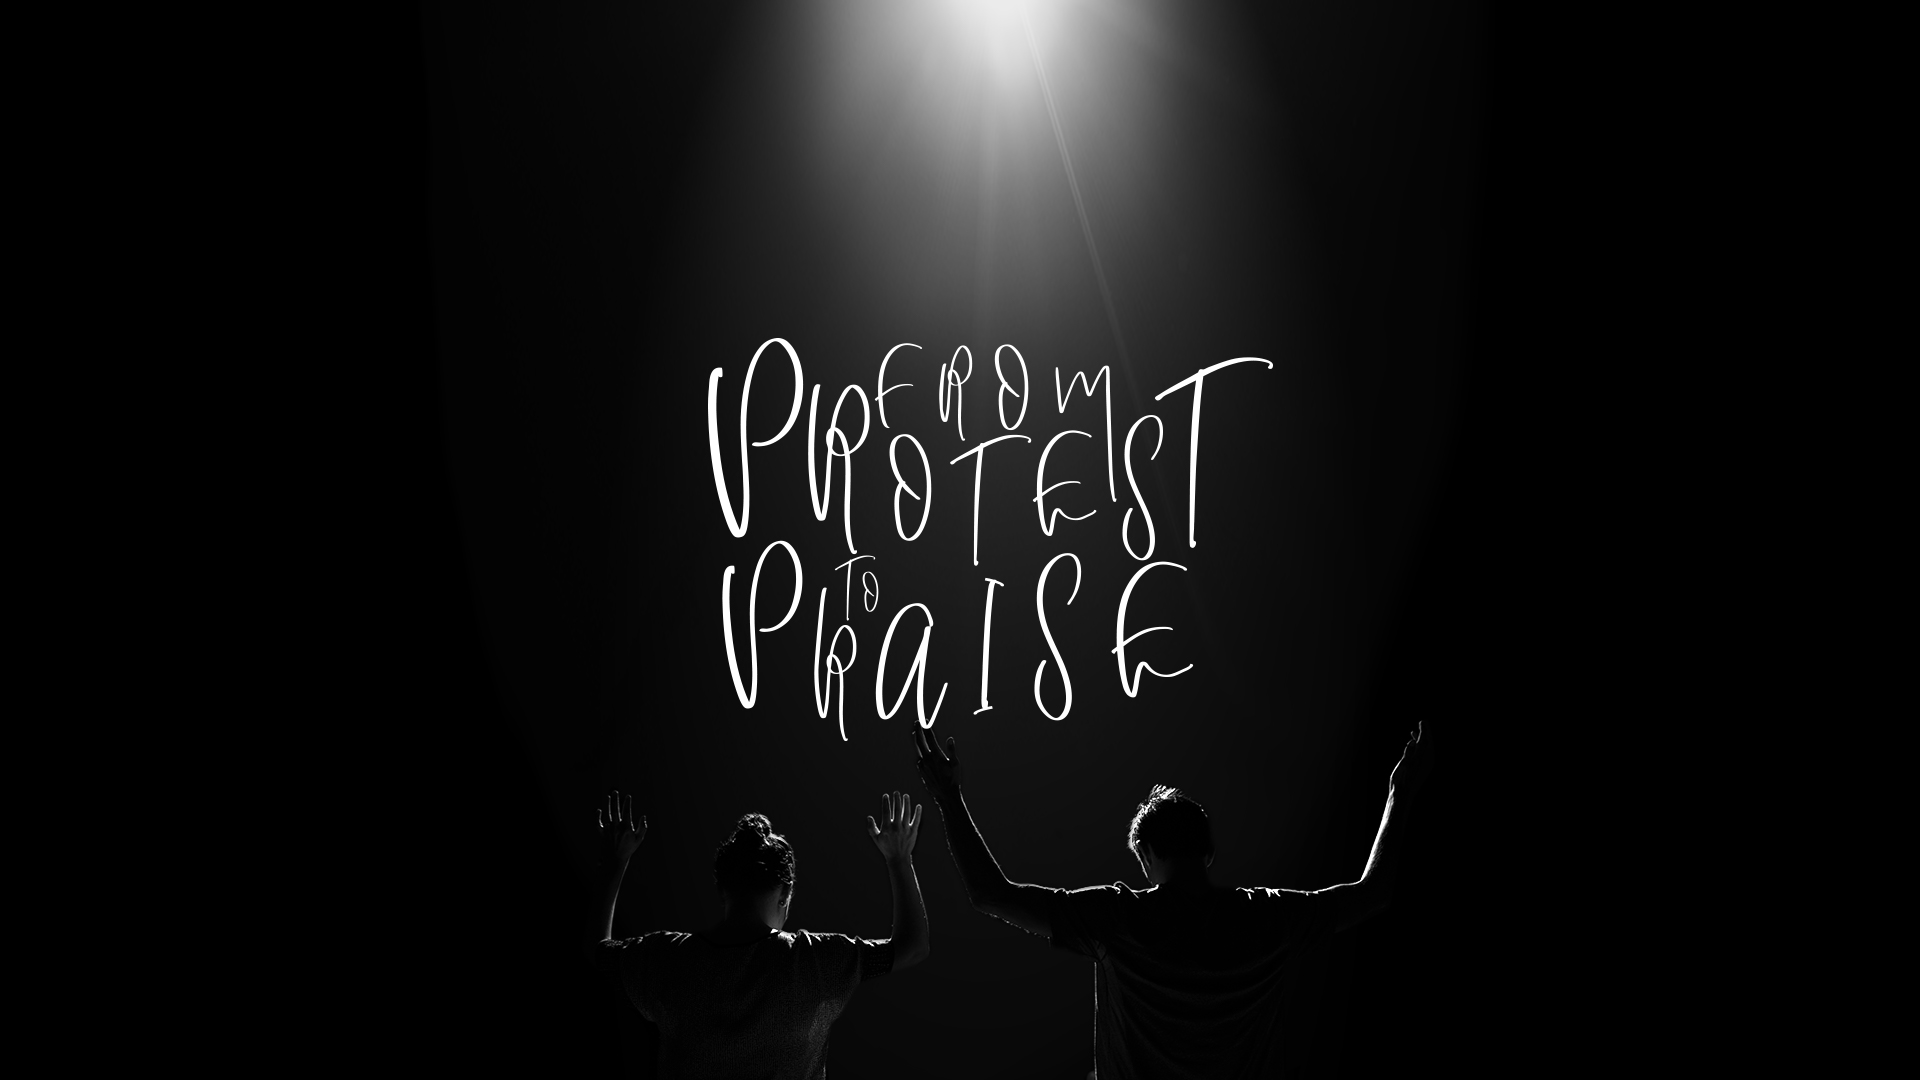 From Protest to Praise (Summer in the Psalms)